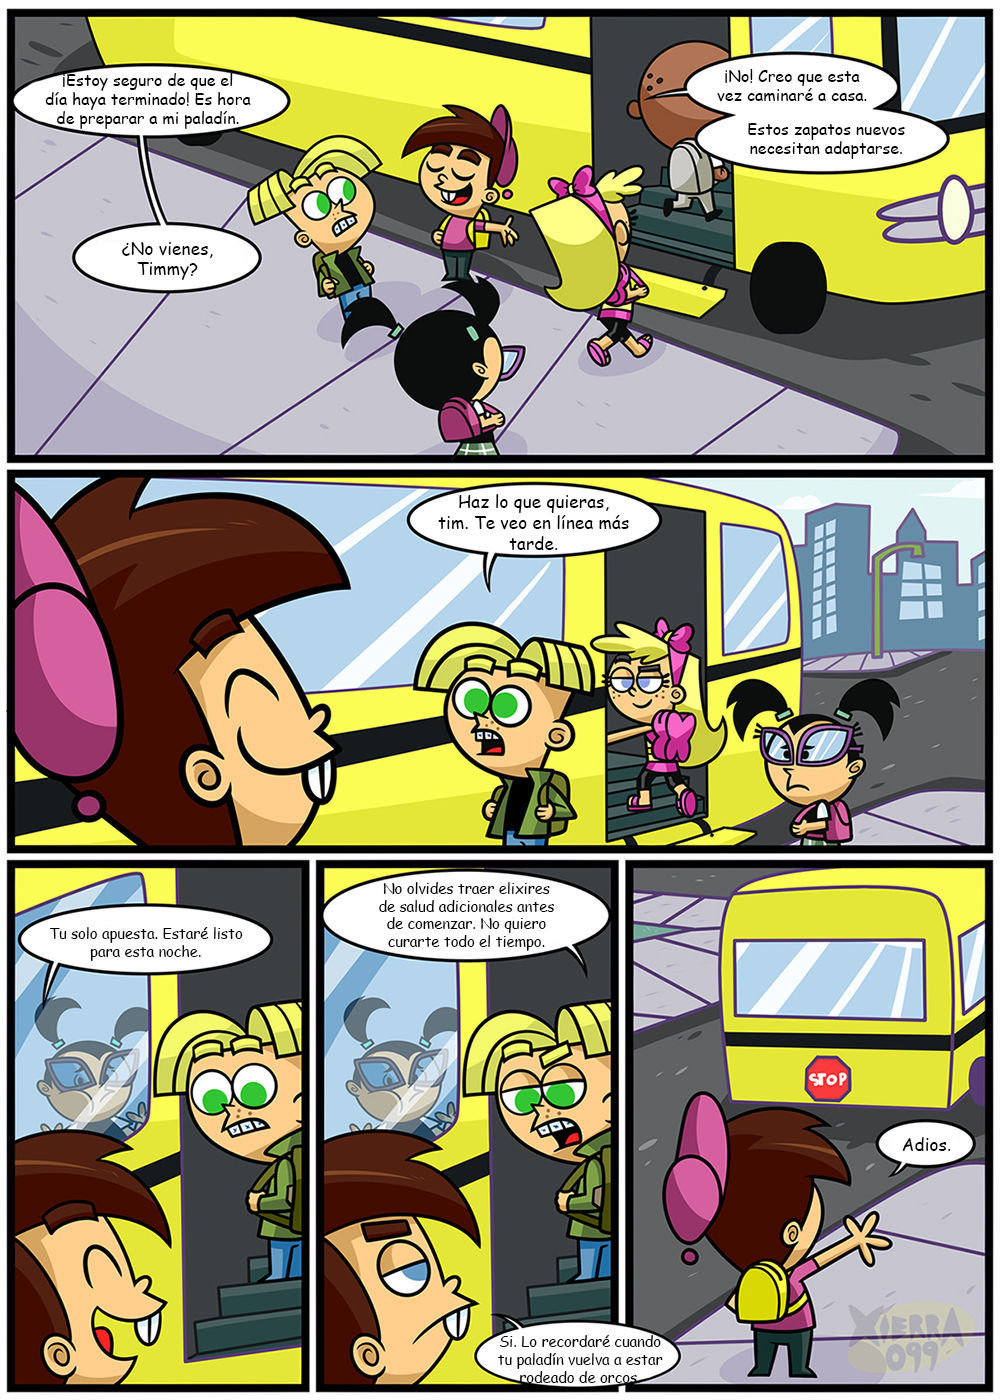 Timmy magical godparents - 5